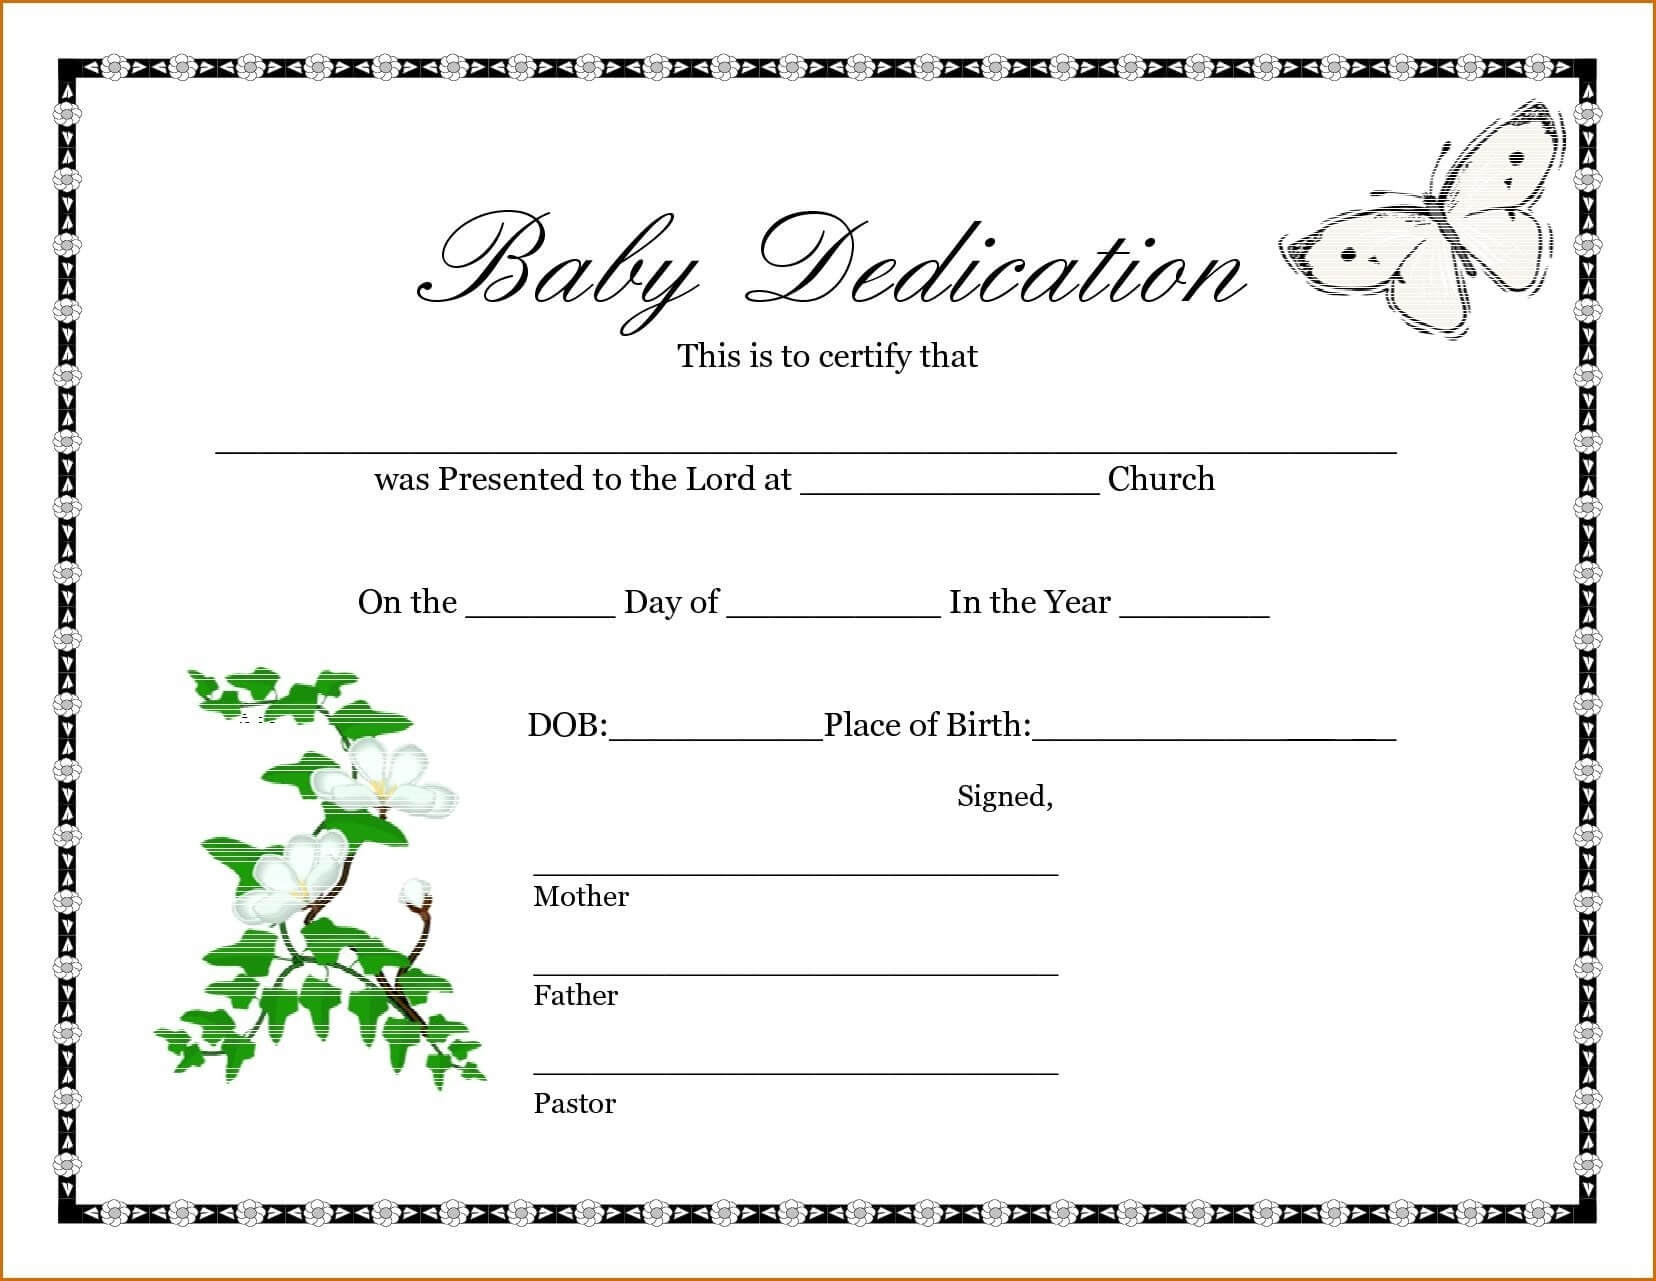 A Birth Certificate Template | Safebest.xyz With Regard To Build A Bear Birth Certificate Template